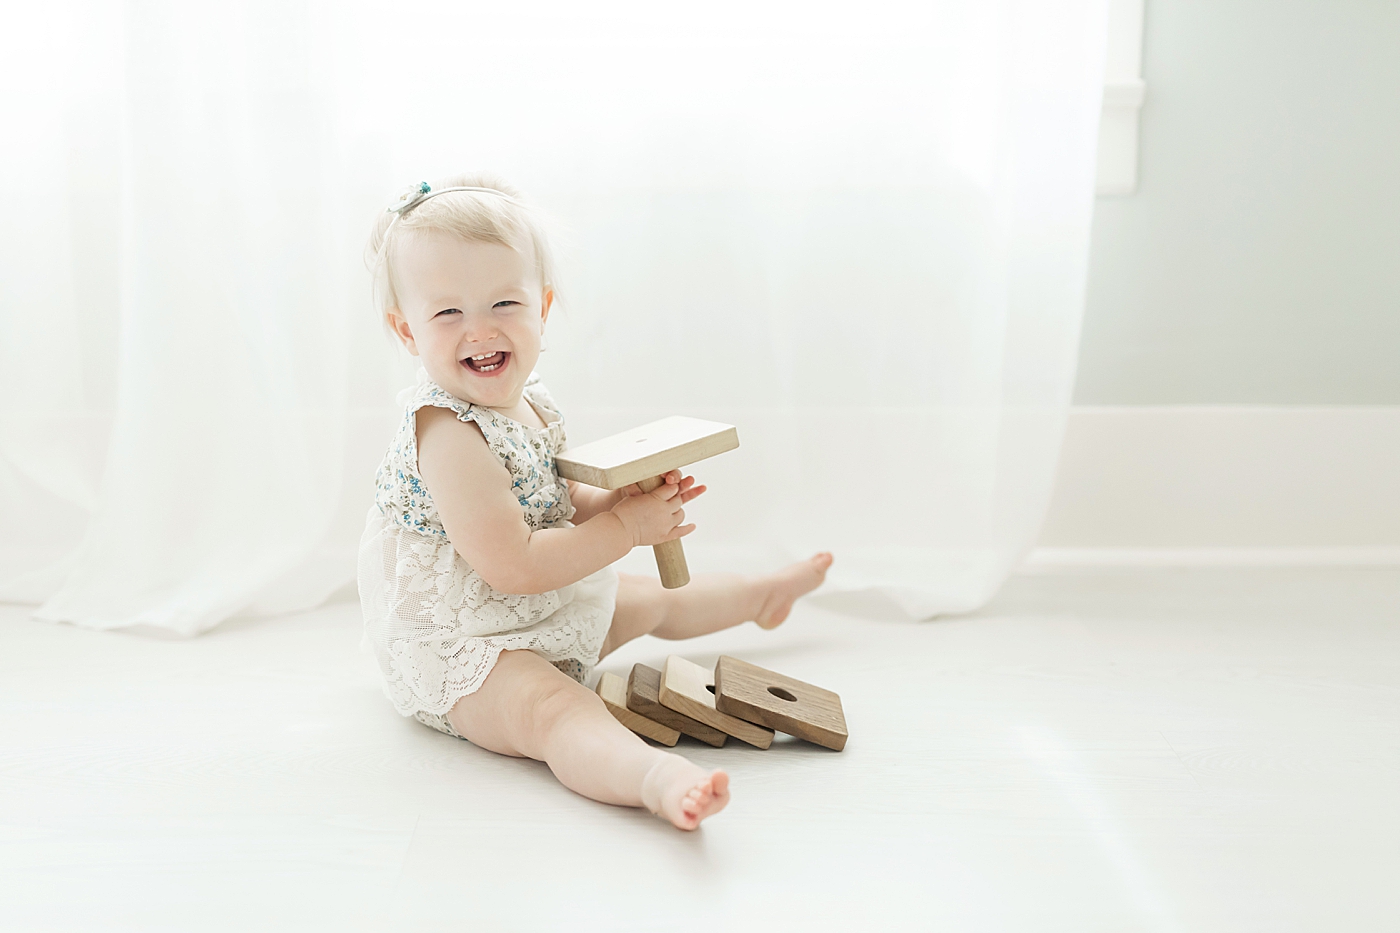 One year old smiling and playing with wooden stacker toy. Photo by Fresh Light Photography.